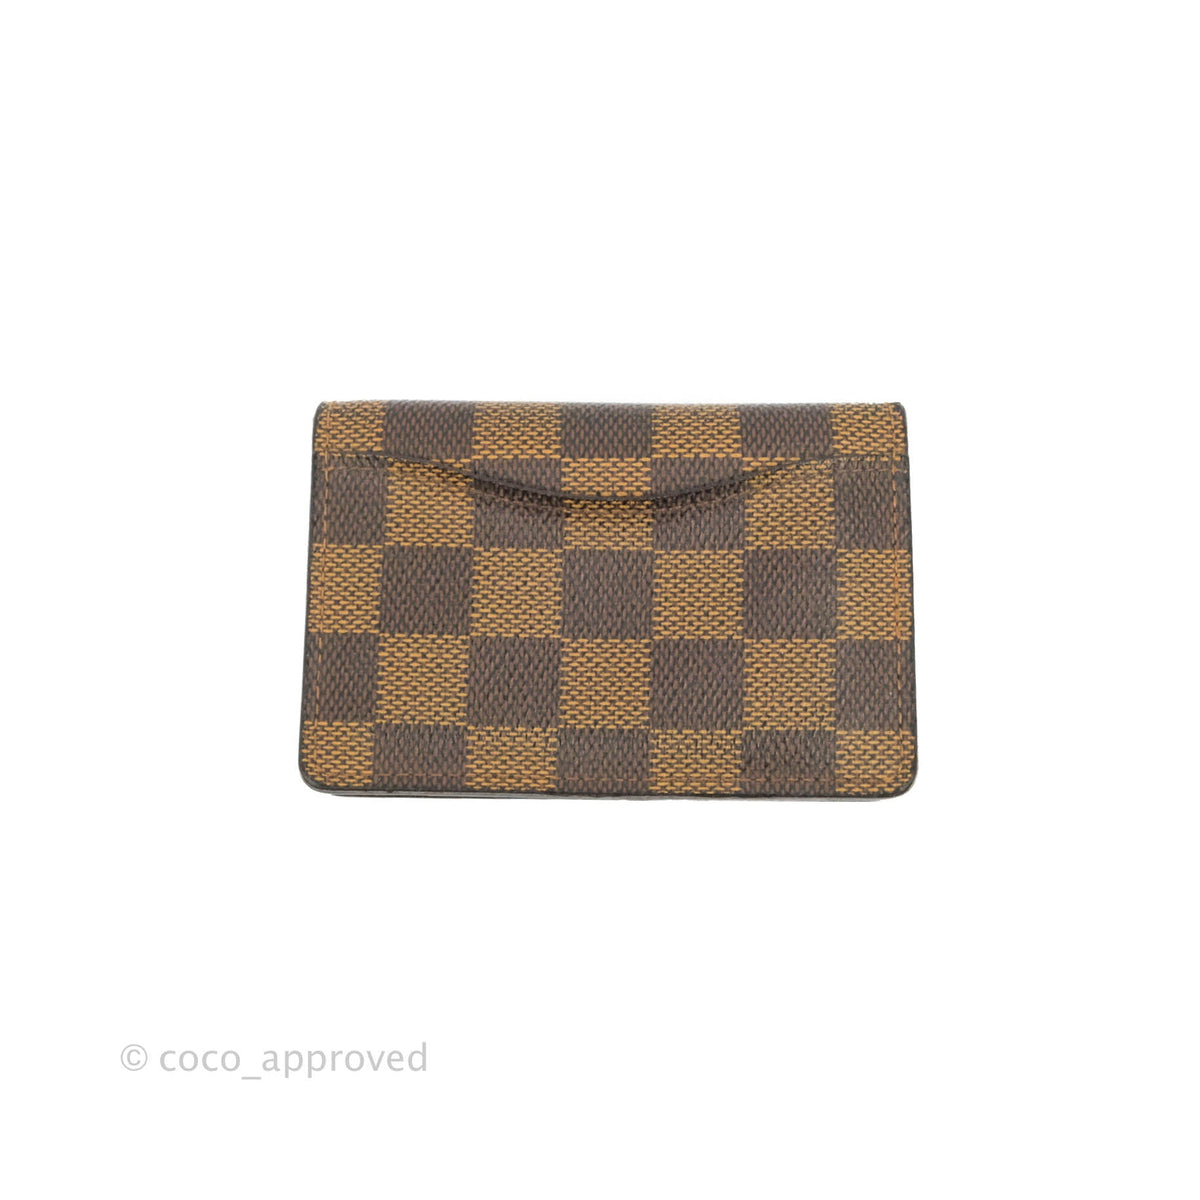 How to use the Louis Vuitton Pocket Agenda as a wallet/checkbook